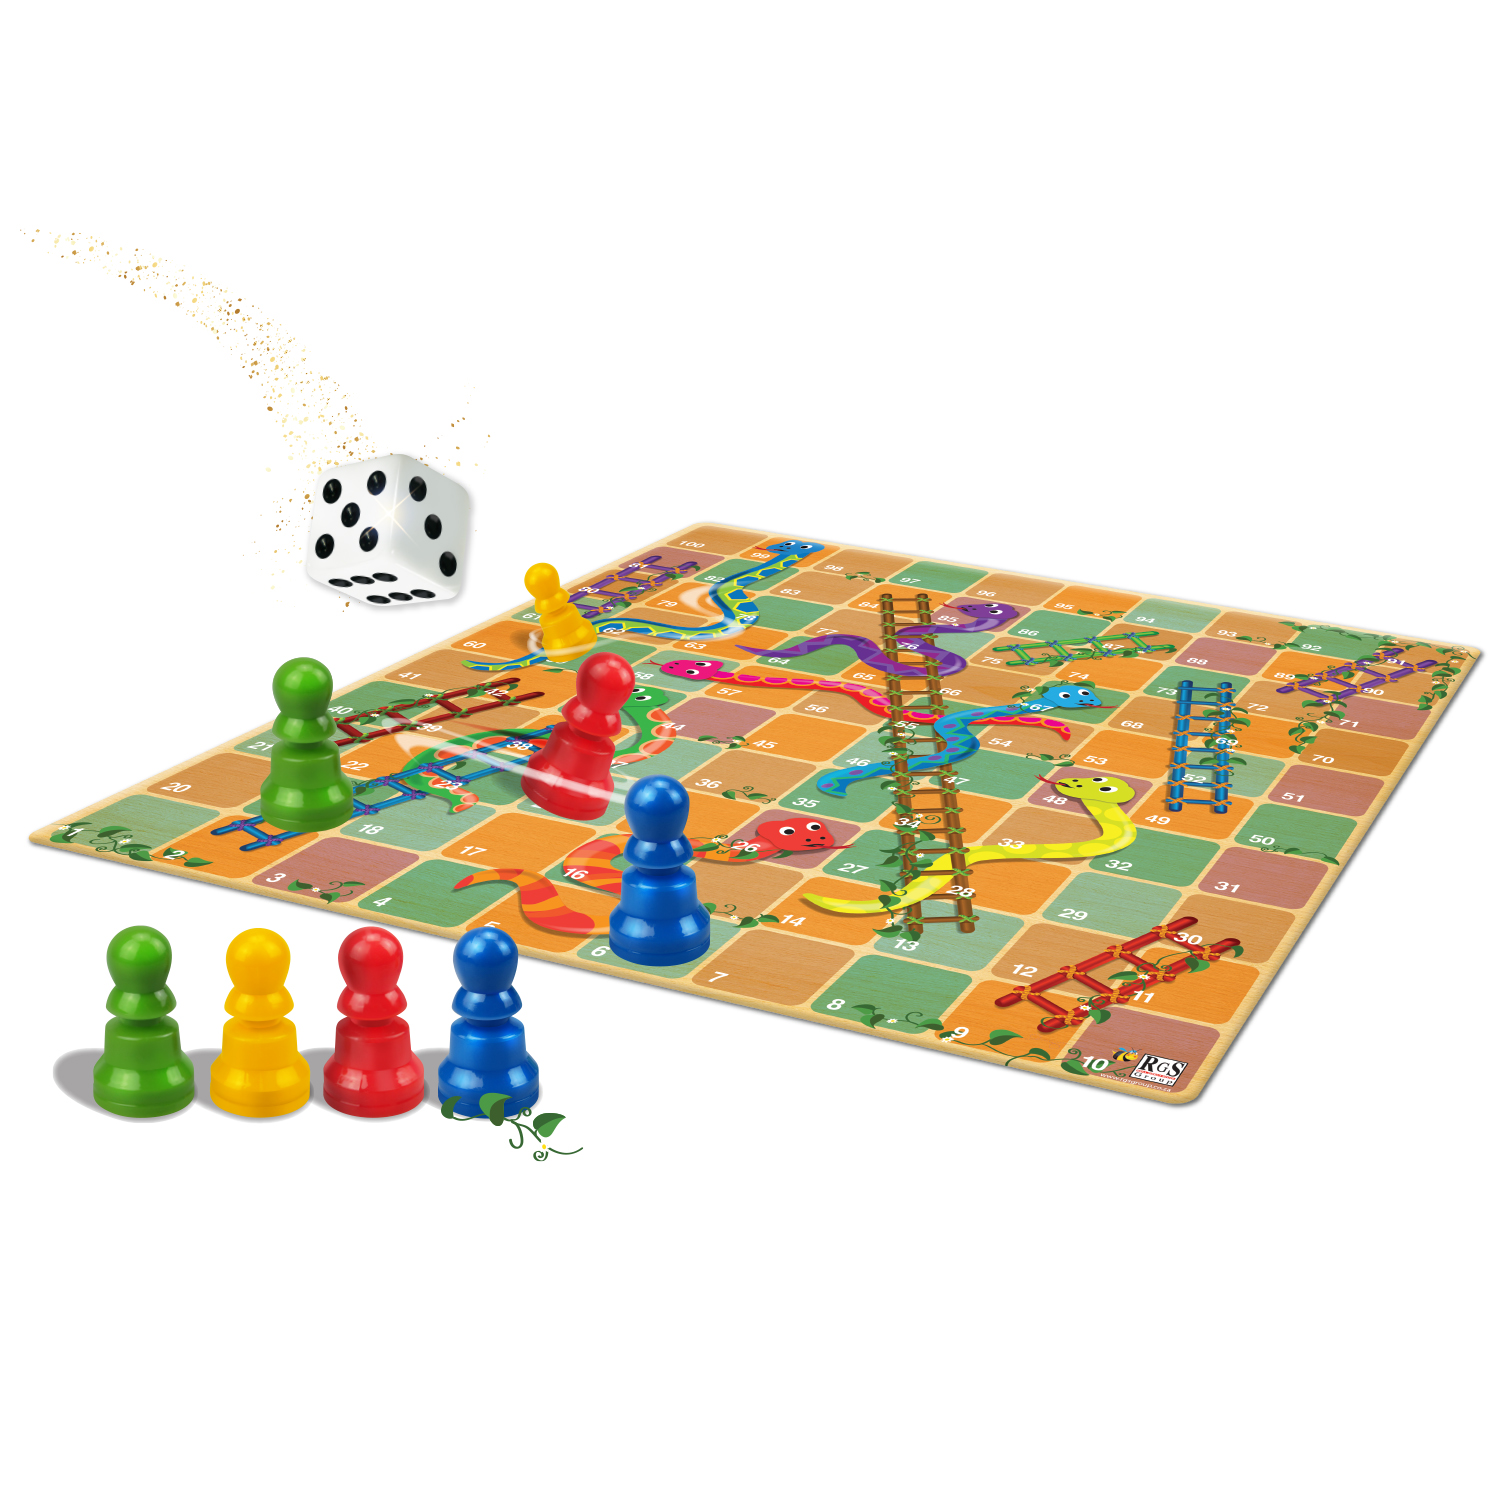 RGS snakes and ladders with 4 tokens and 1 dice